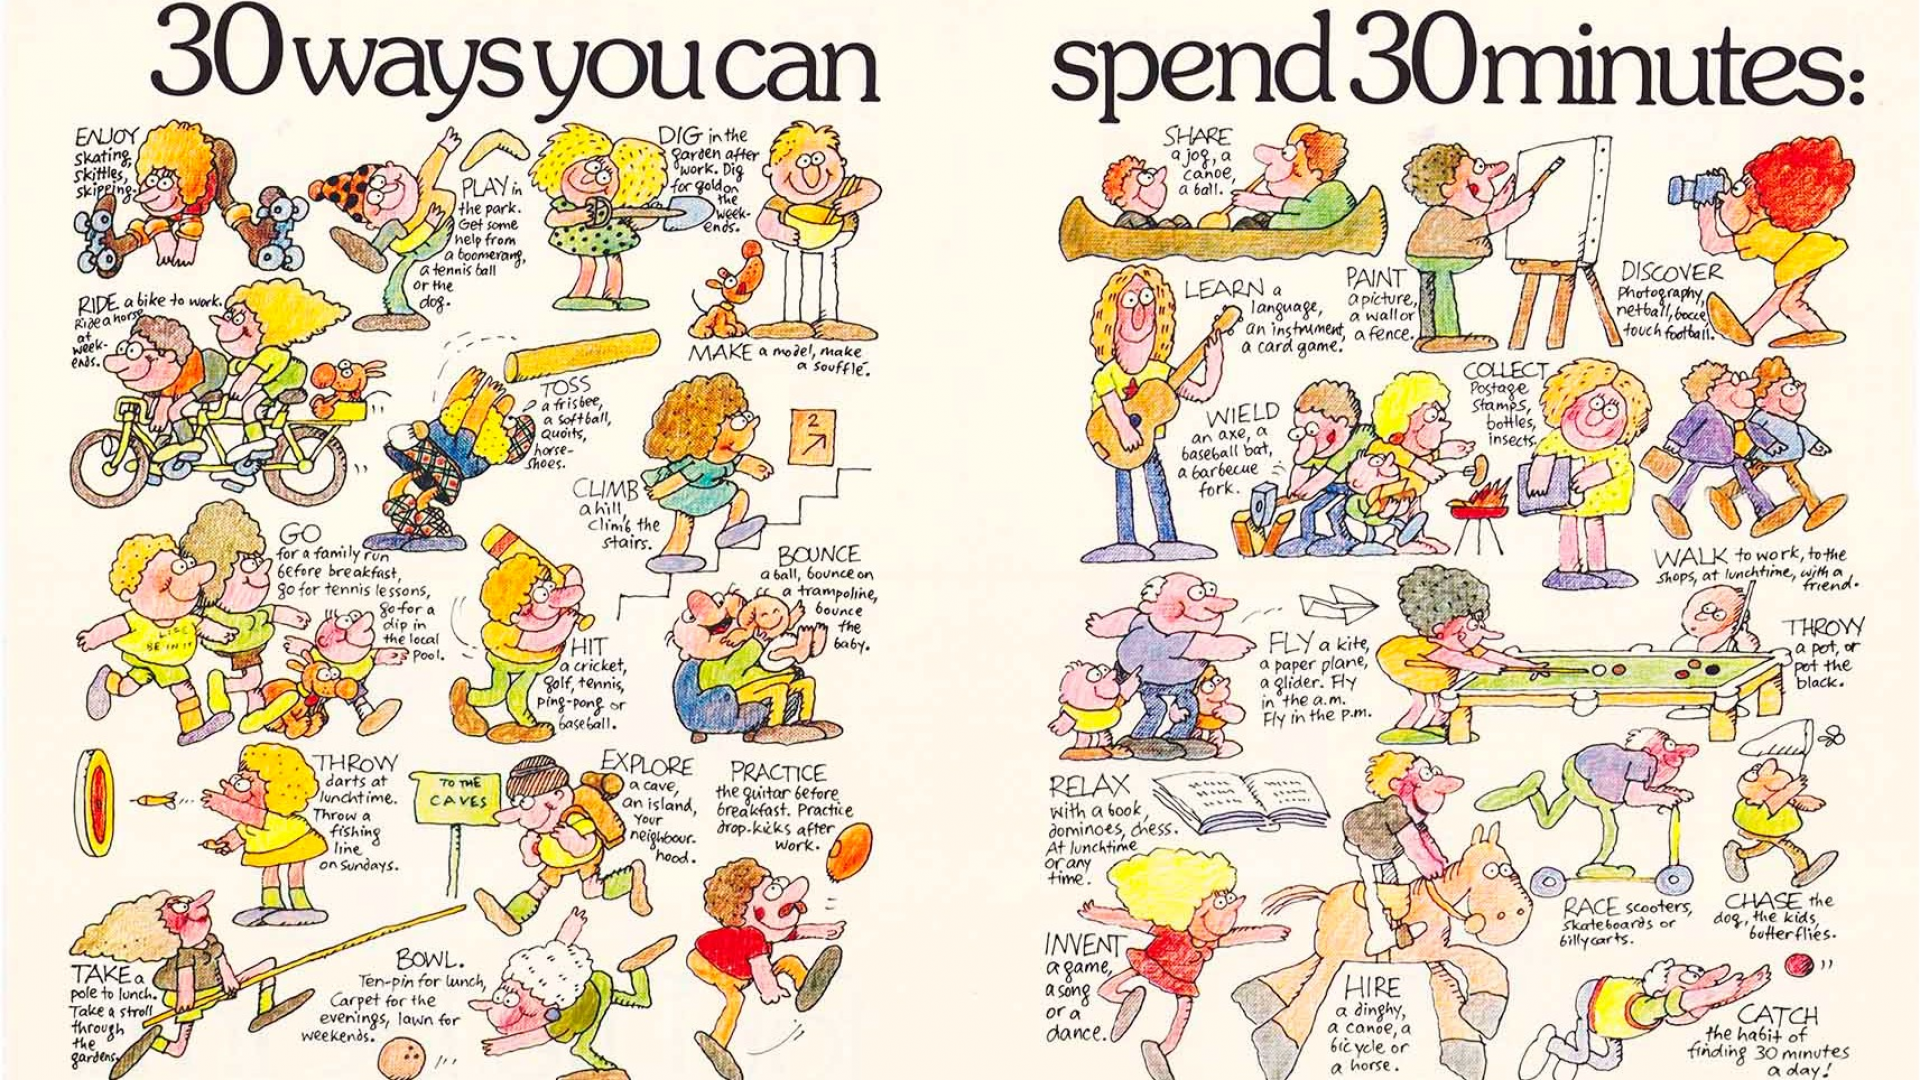 30 Ways You Can Spend 30 Minutes for 'Life.Be in it' poster